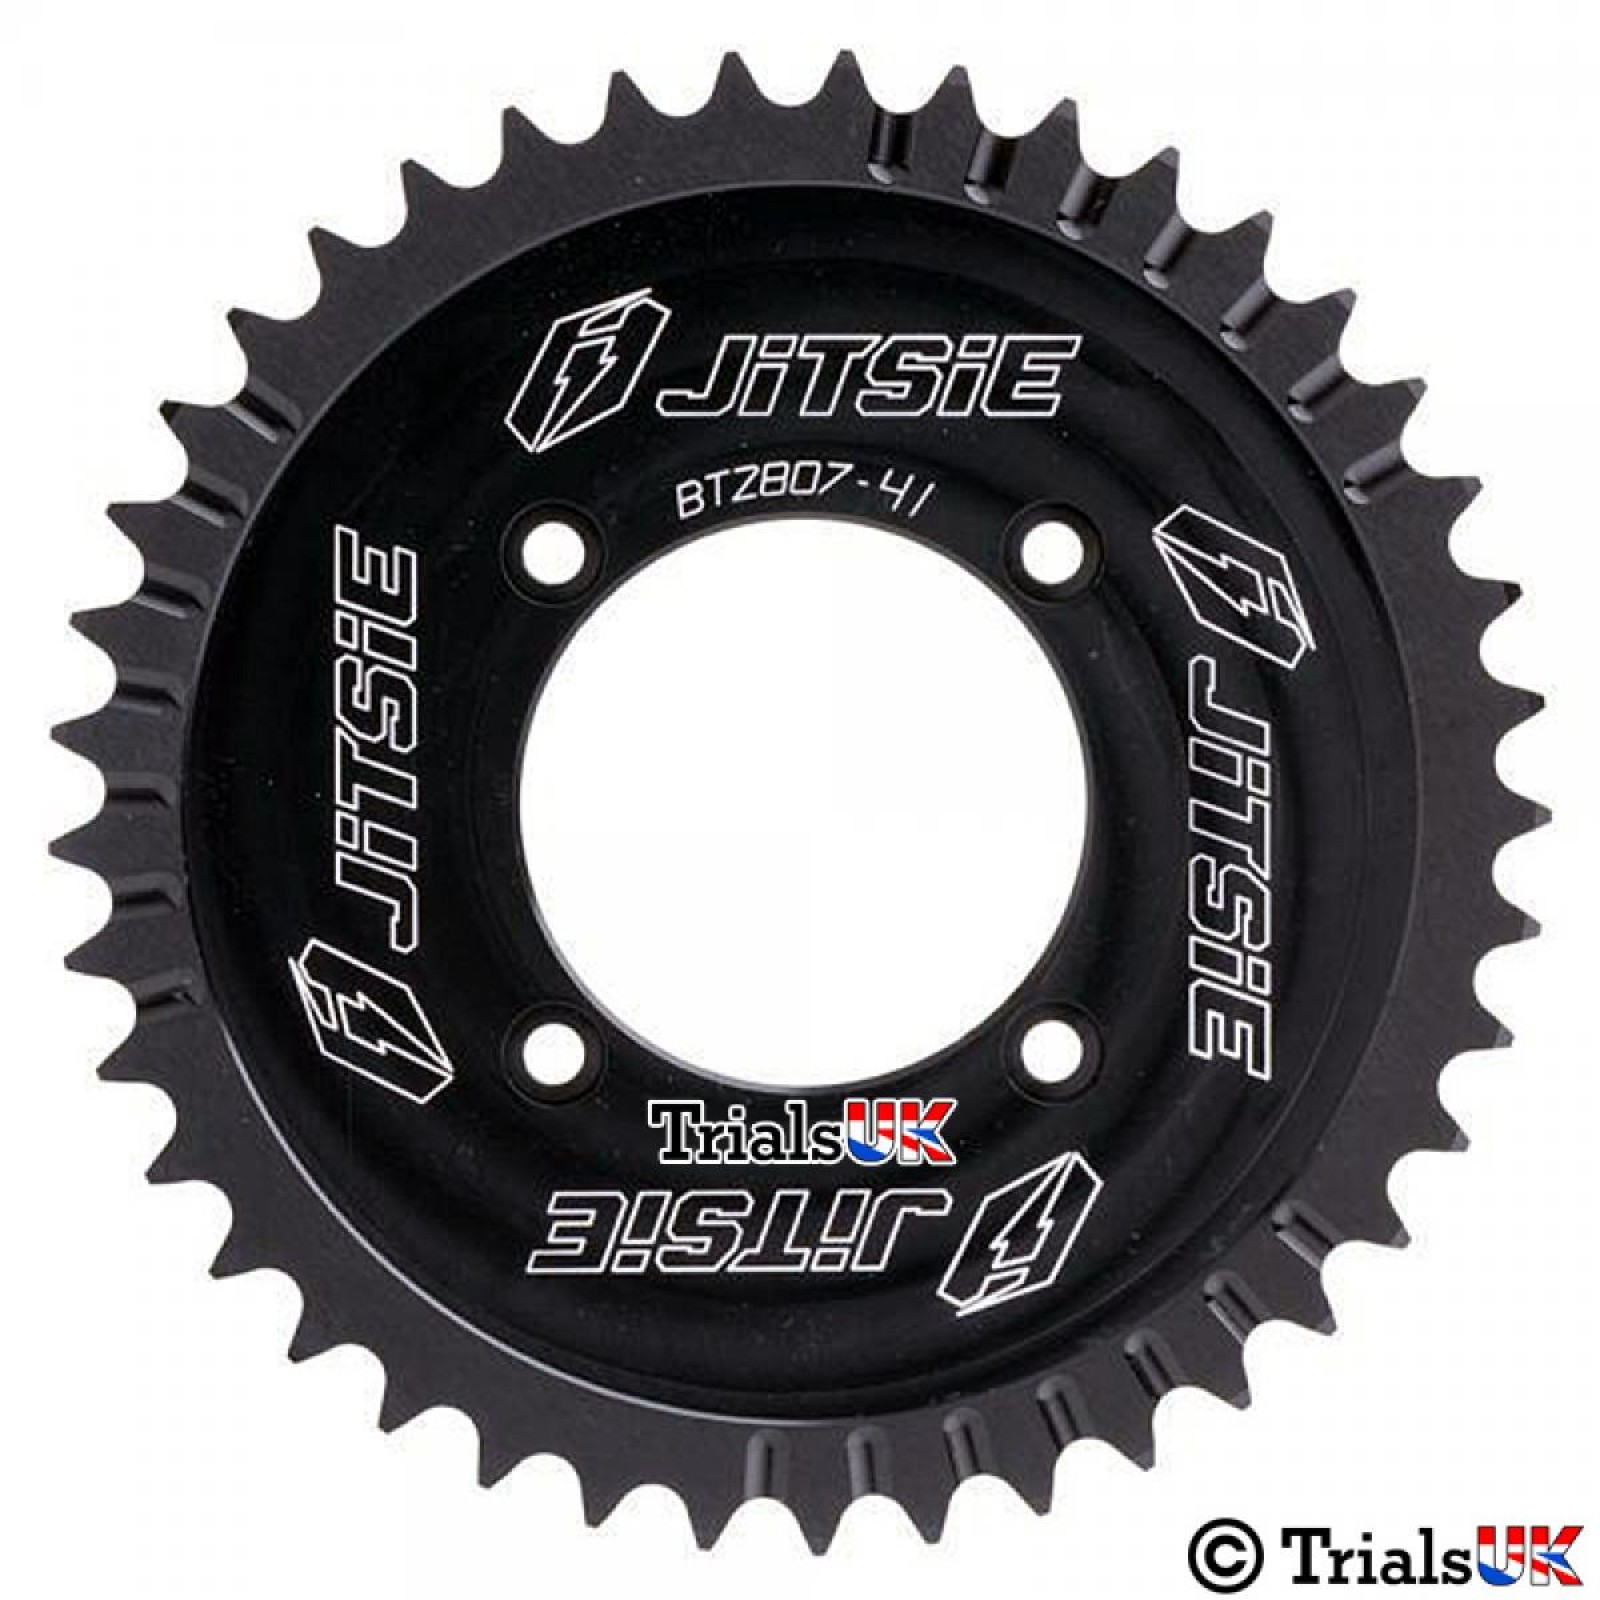 Jitsie Pro Solid Face Rear Sprocket FIM Approved